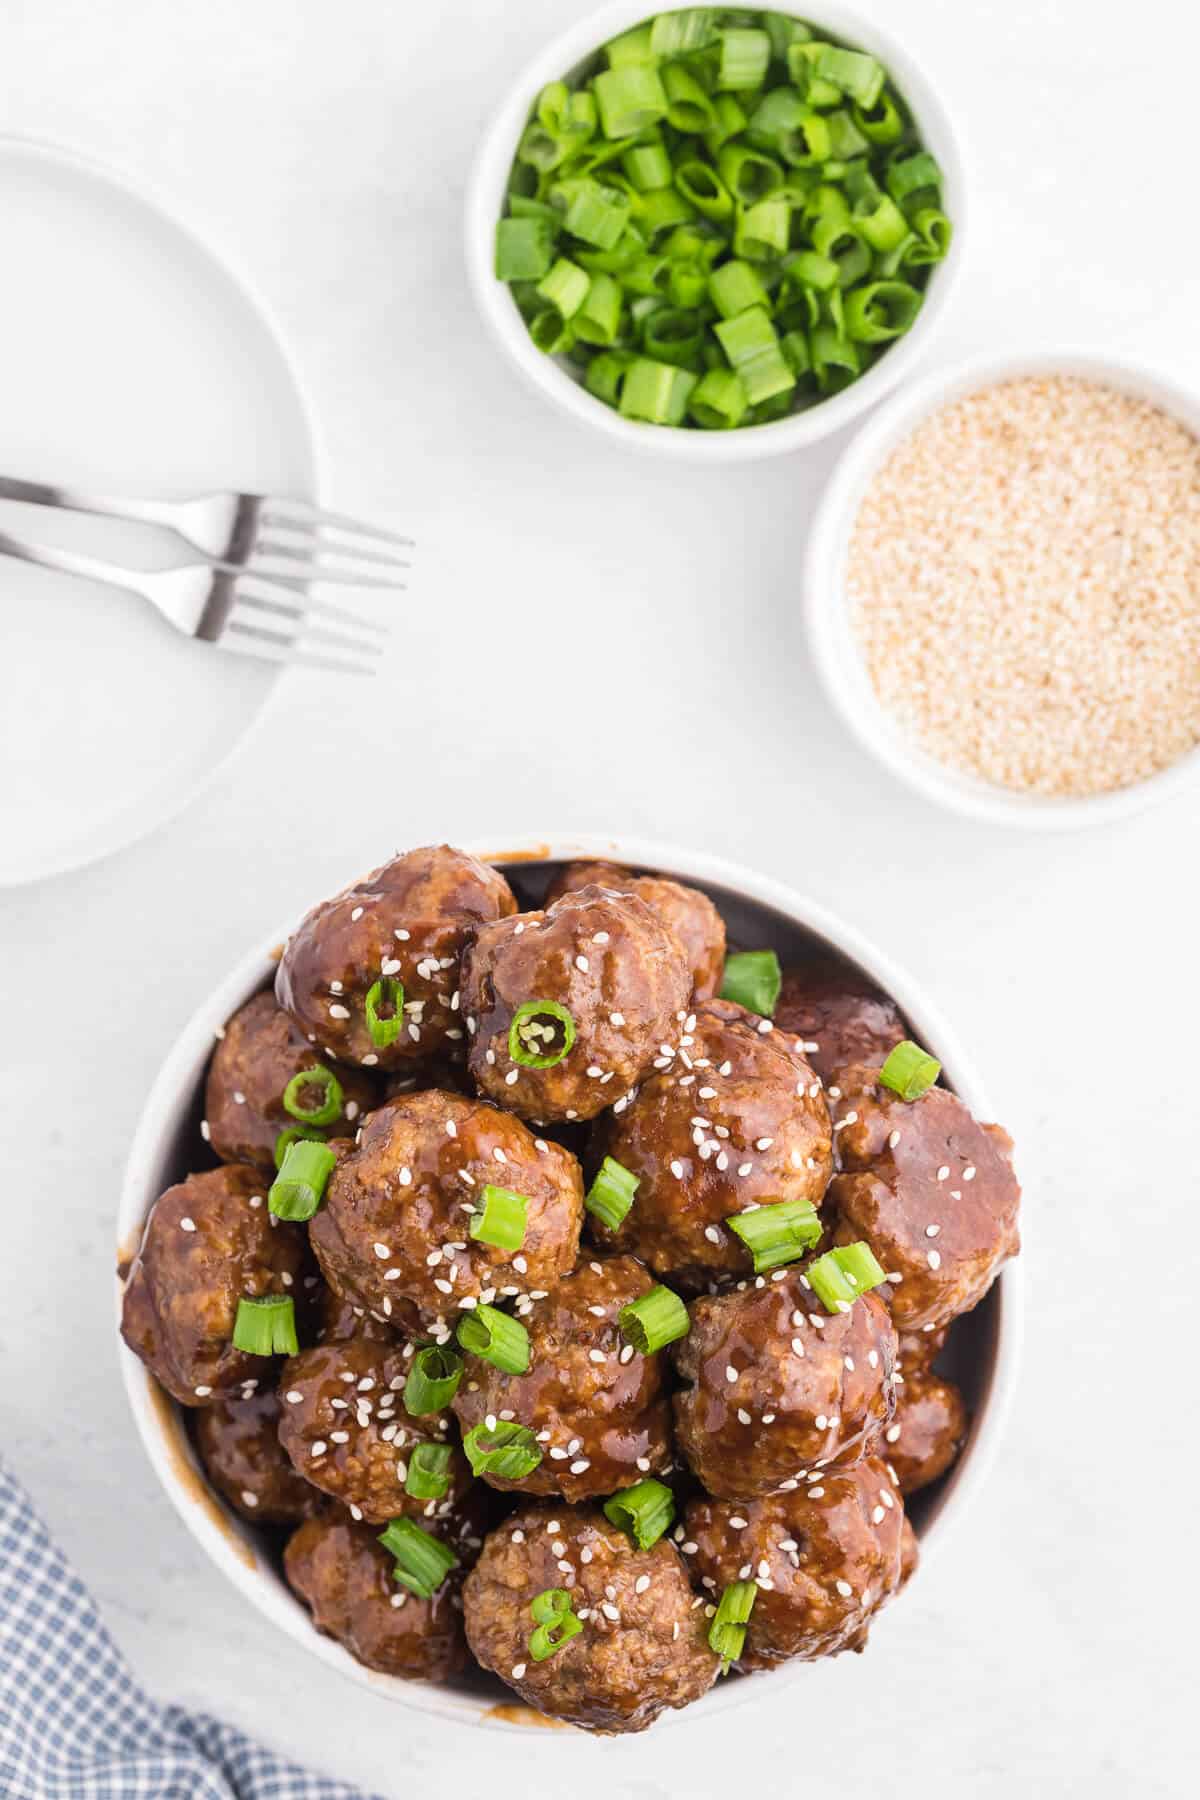 Ginger Meatballs - Add this Asian meatball recipe to your next party menu! Homemade beef meatballs with zesty ginger are smothered in sweet and tangy stir fry sauce. Yum!